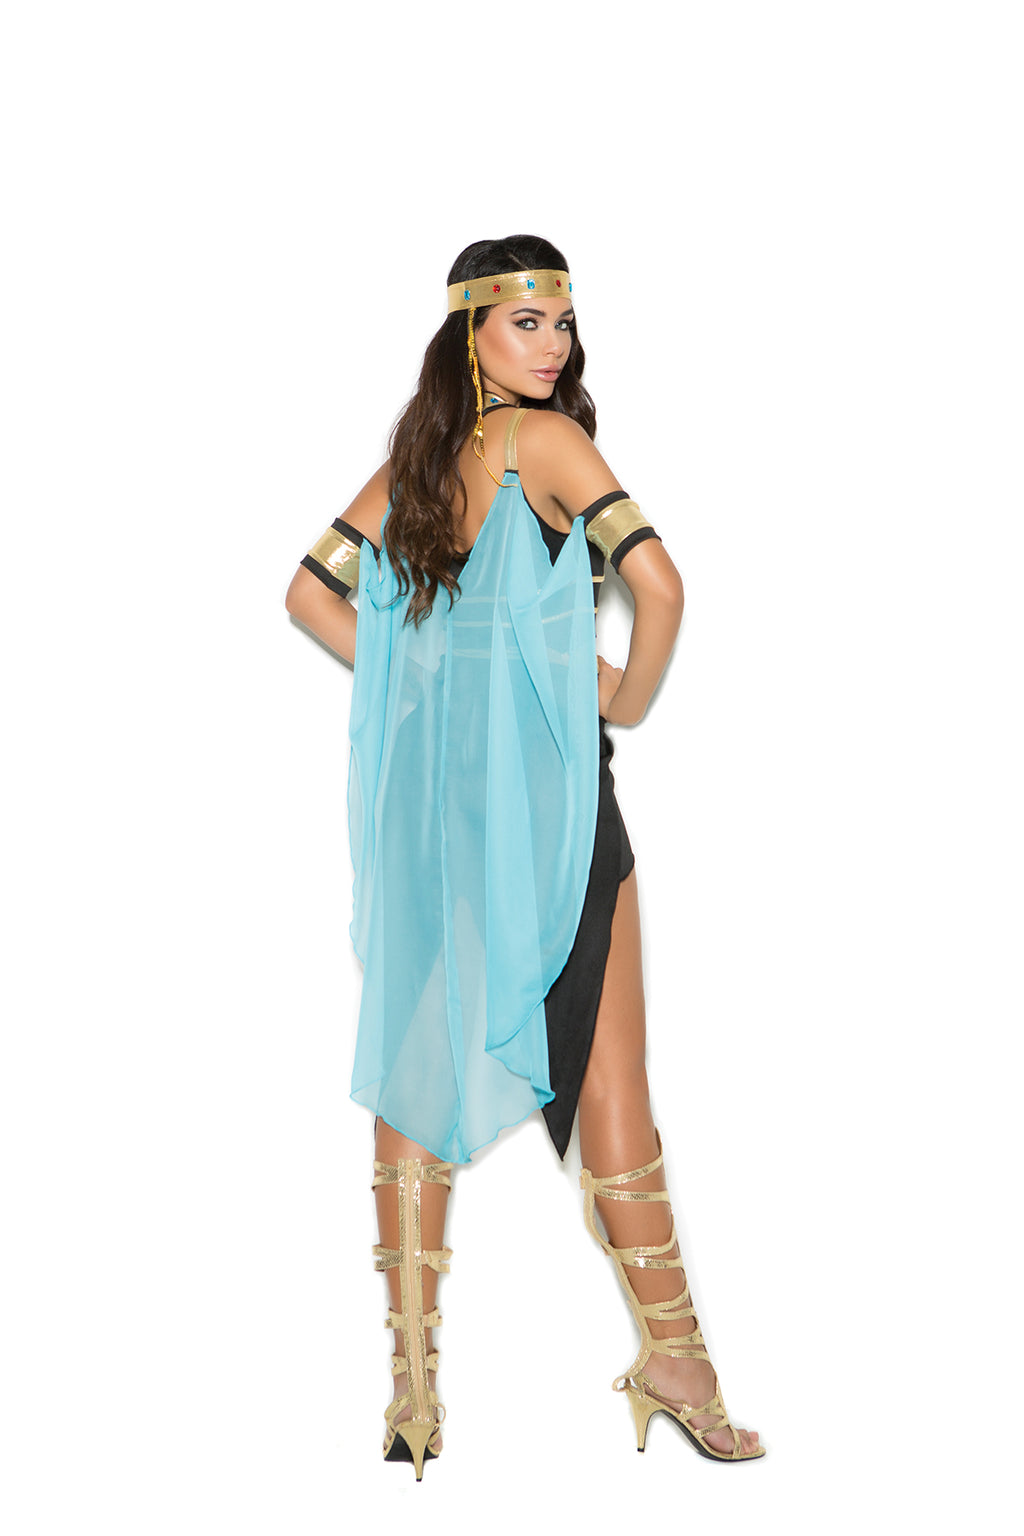 "Queen of the Nile" Costume